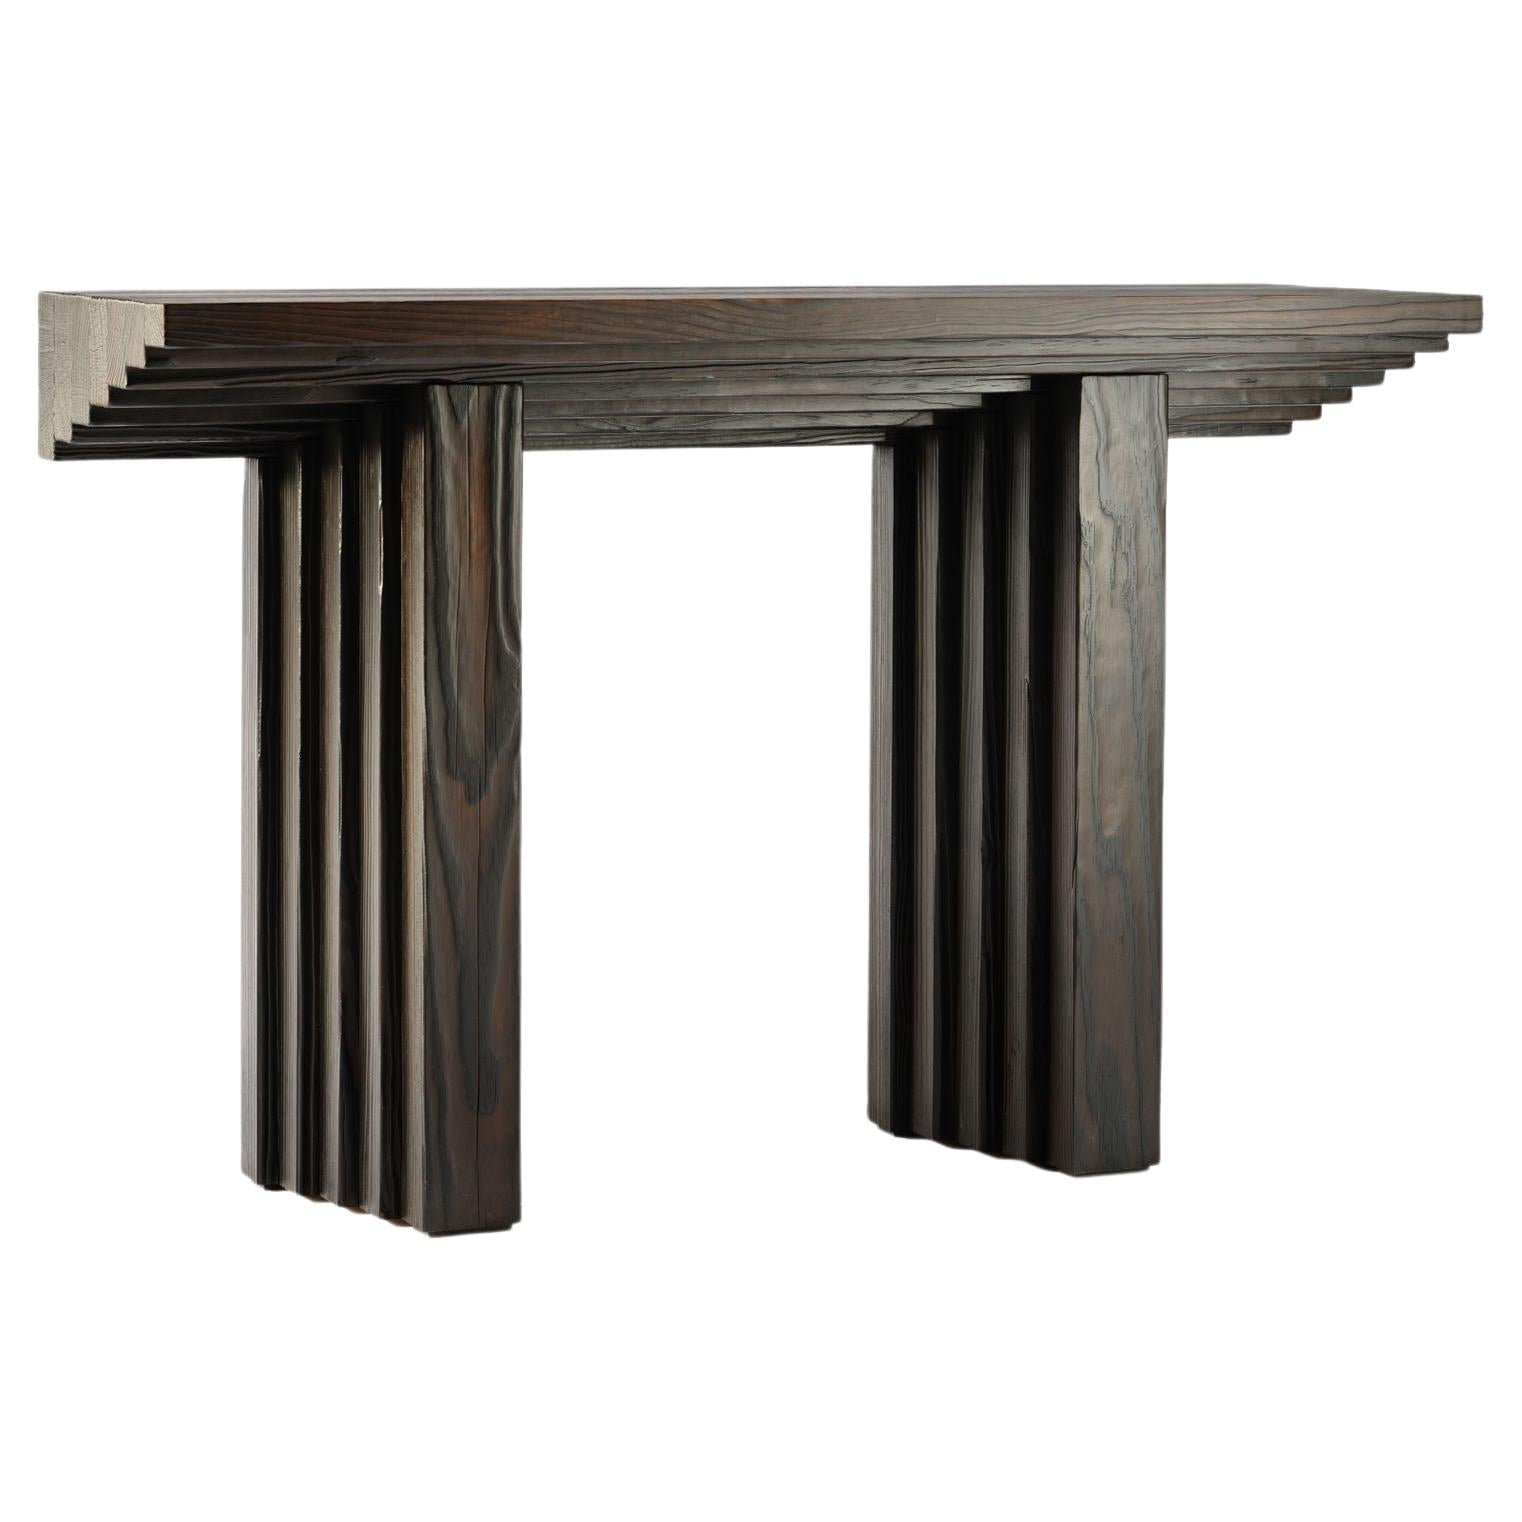 Contemporary black ‘Shou Sugi Ban’ burned solid wood Ater console by Tim Vranken For Sale